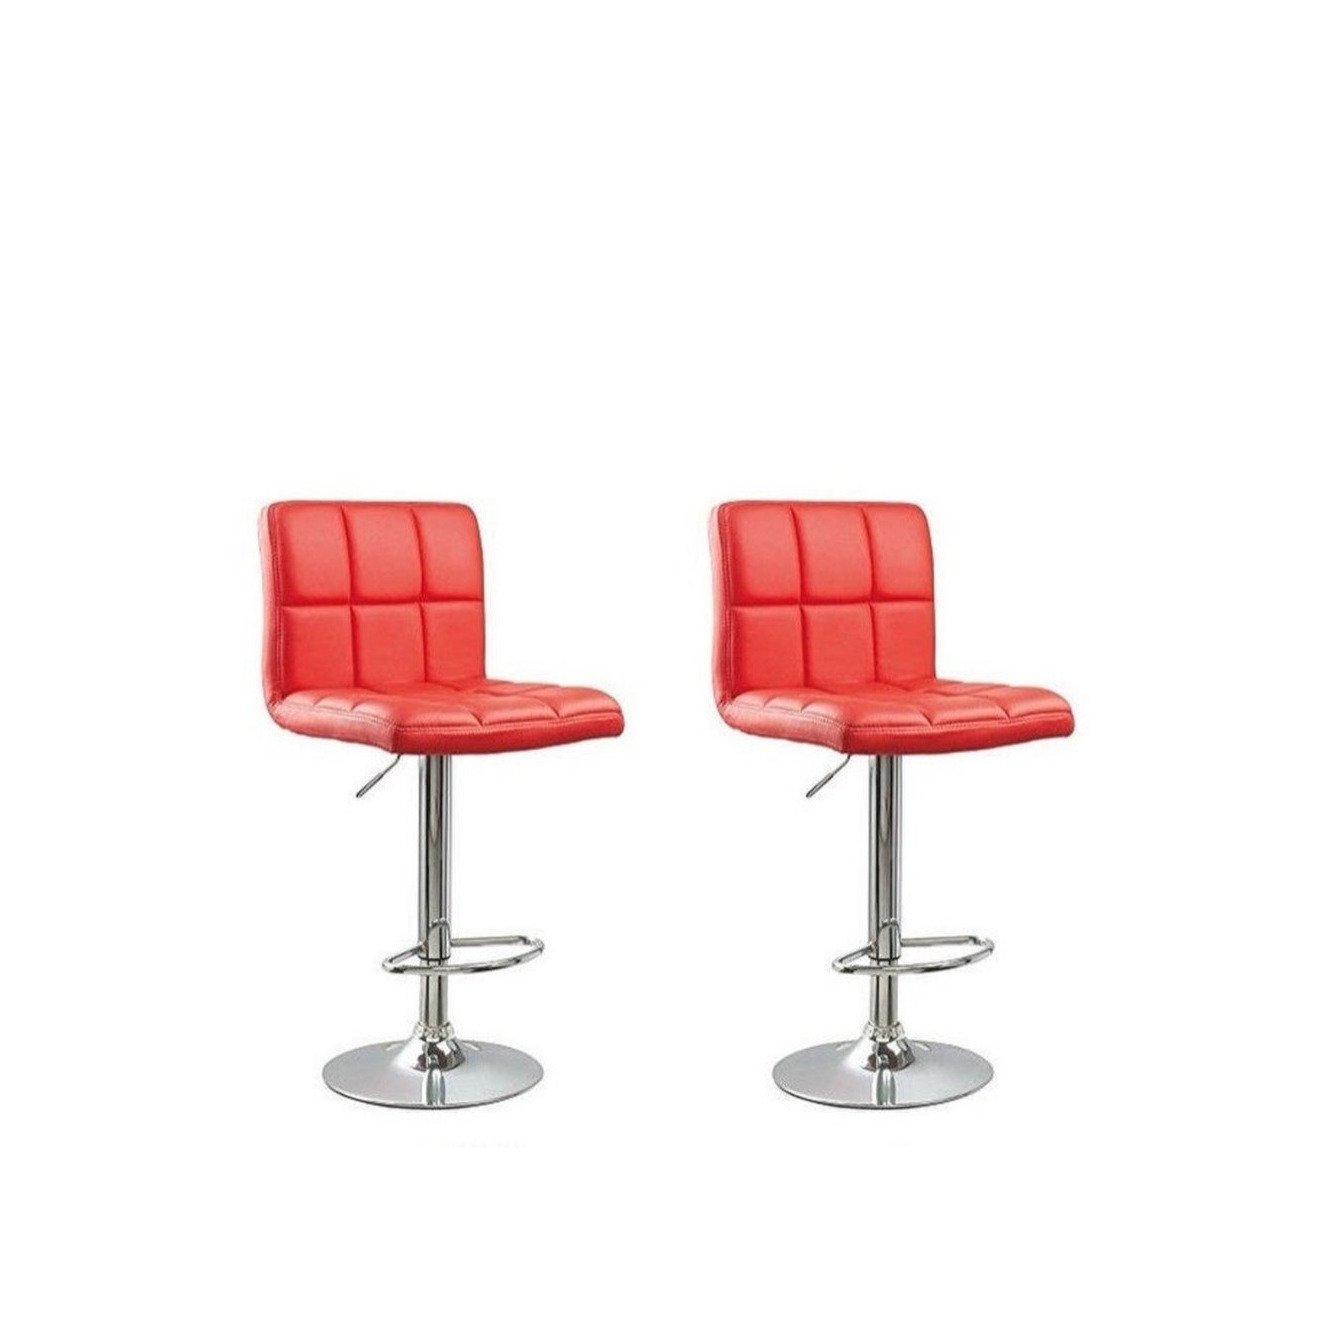 Ronin Faux Leather Swivel Bar Stool Set of 2 available in white ed black brown and grey